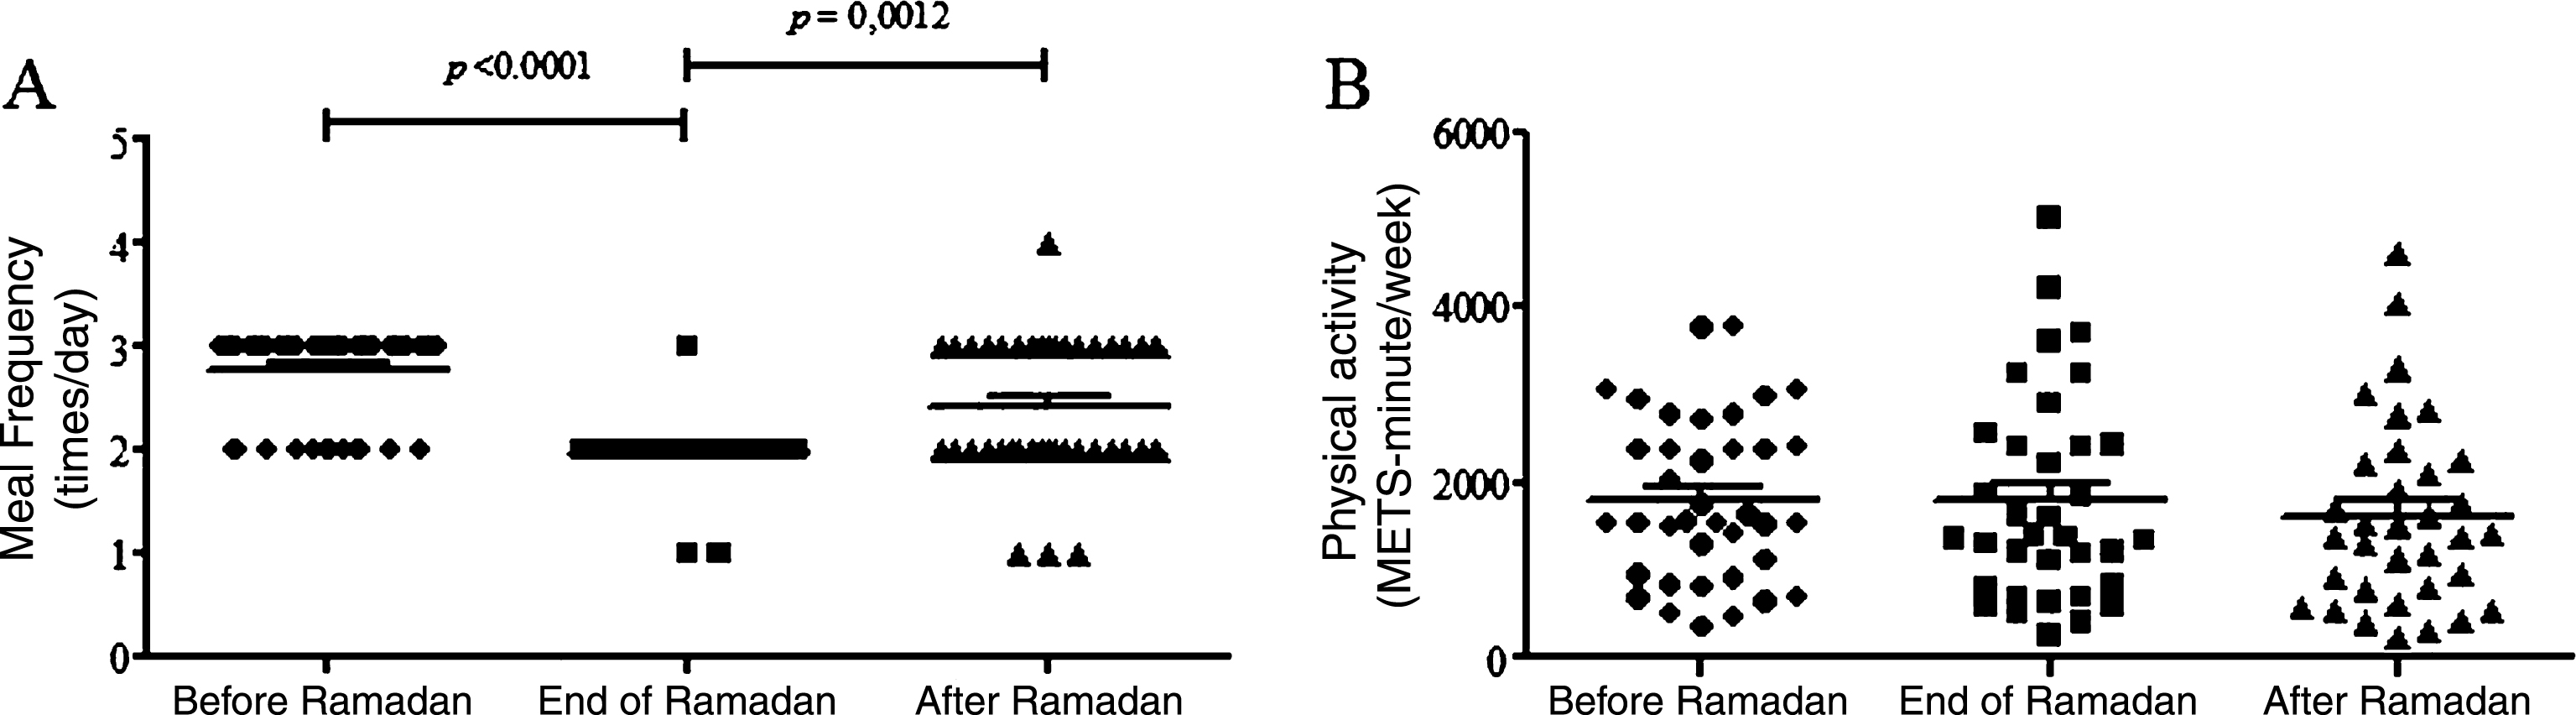 Lifestyle changes including meal frequency (A) and physical activity (B), before, at the end and after Ramadan.